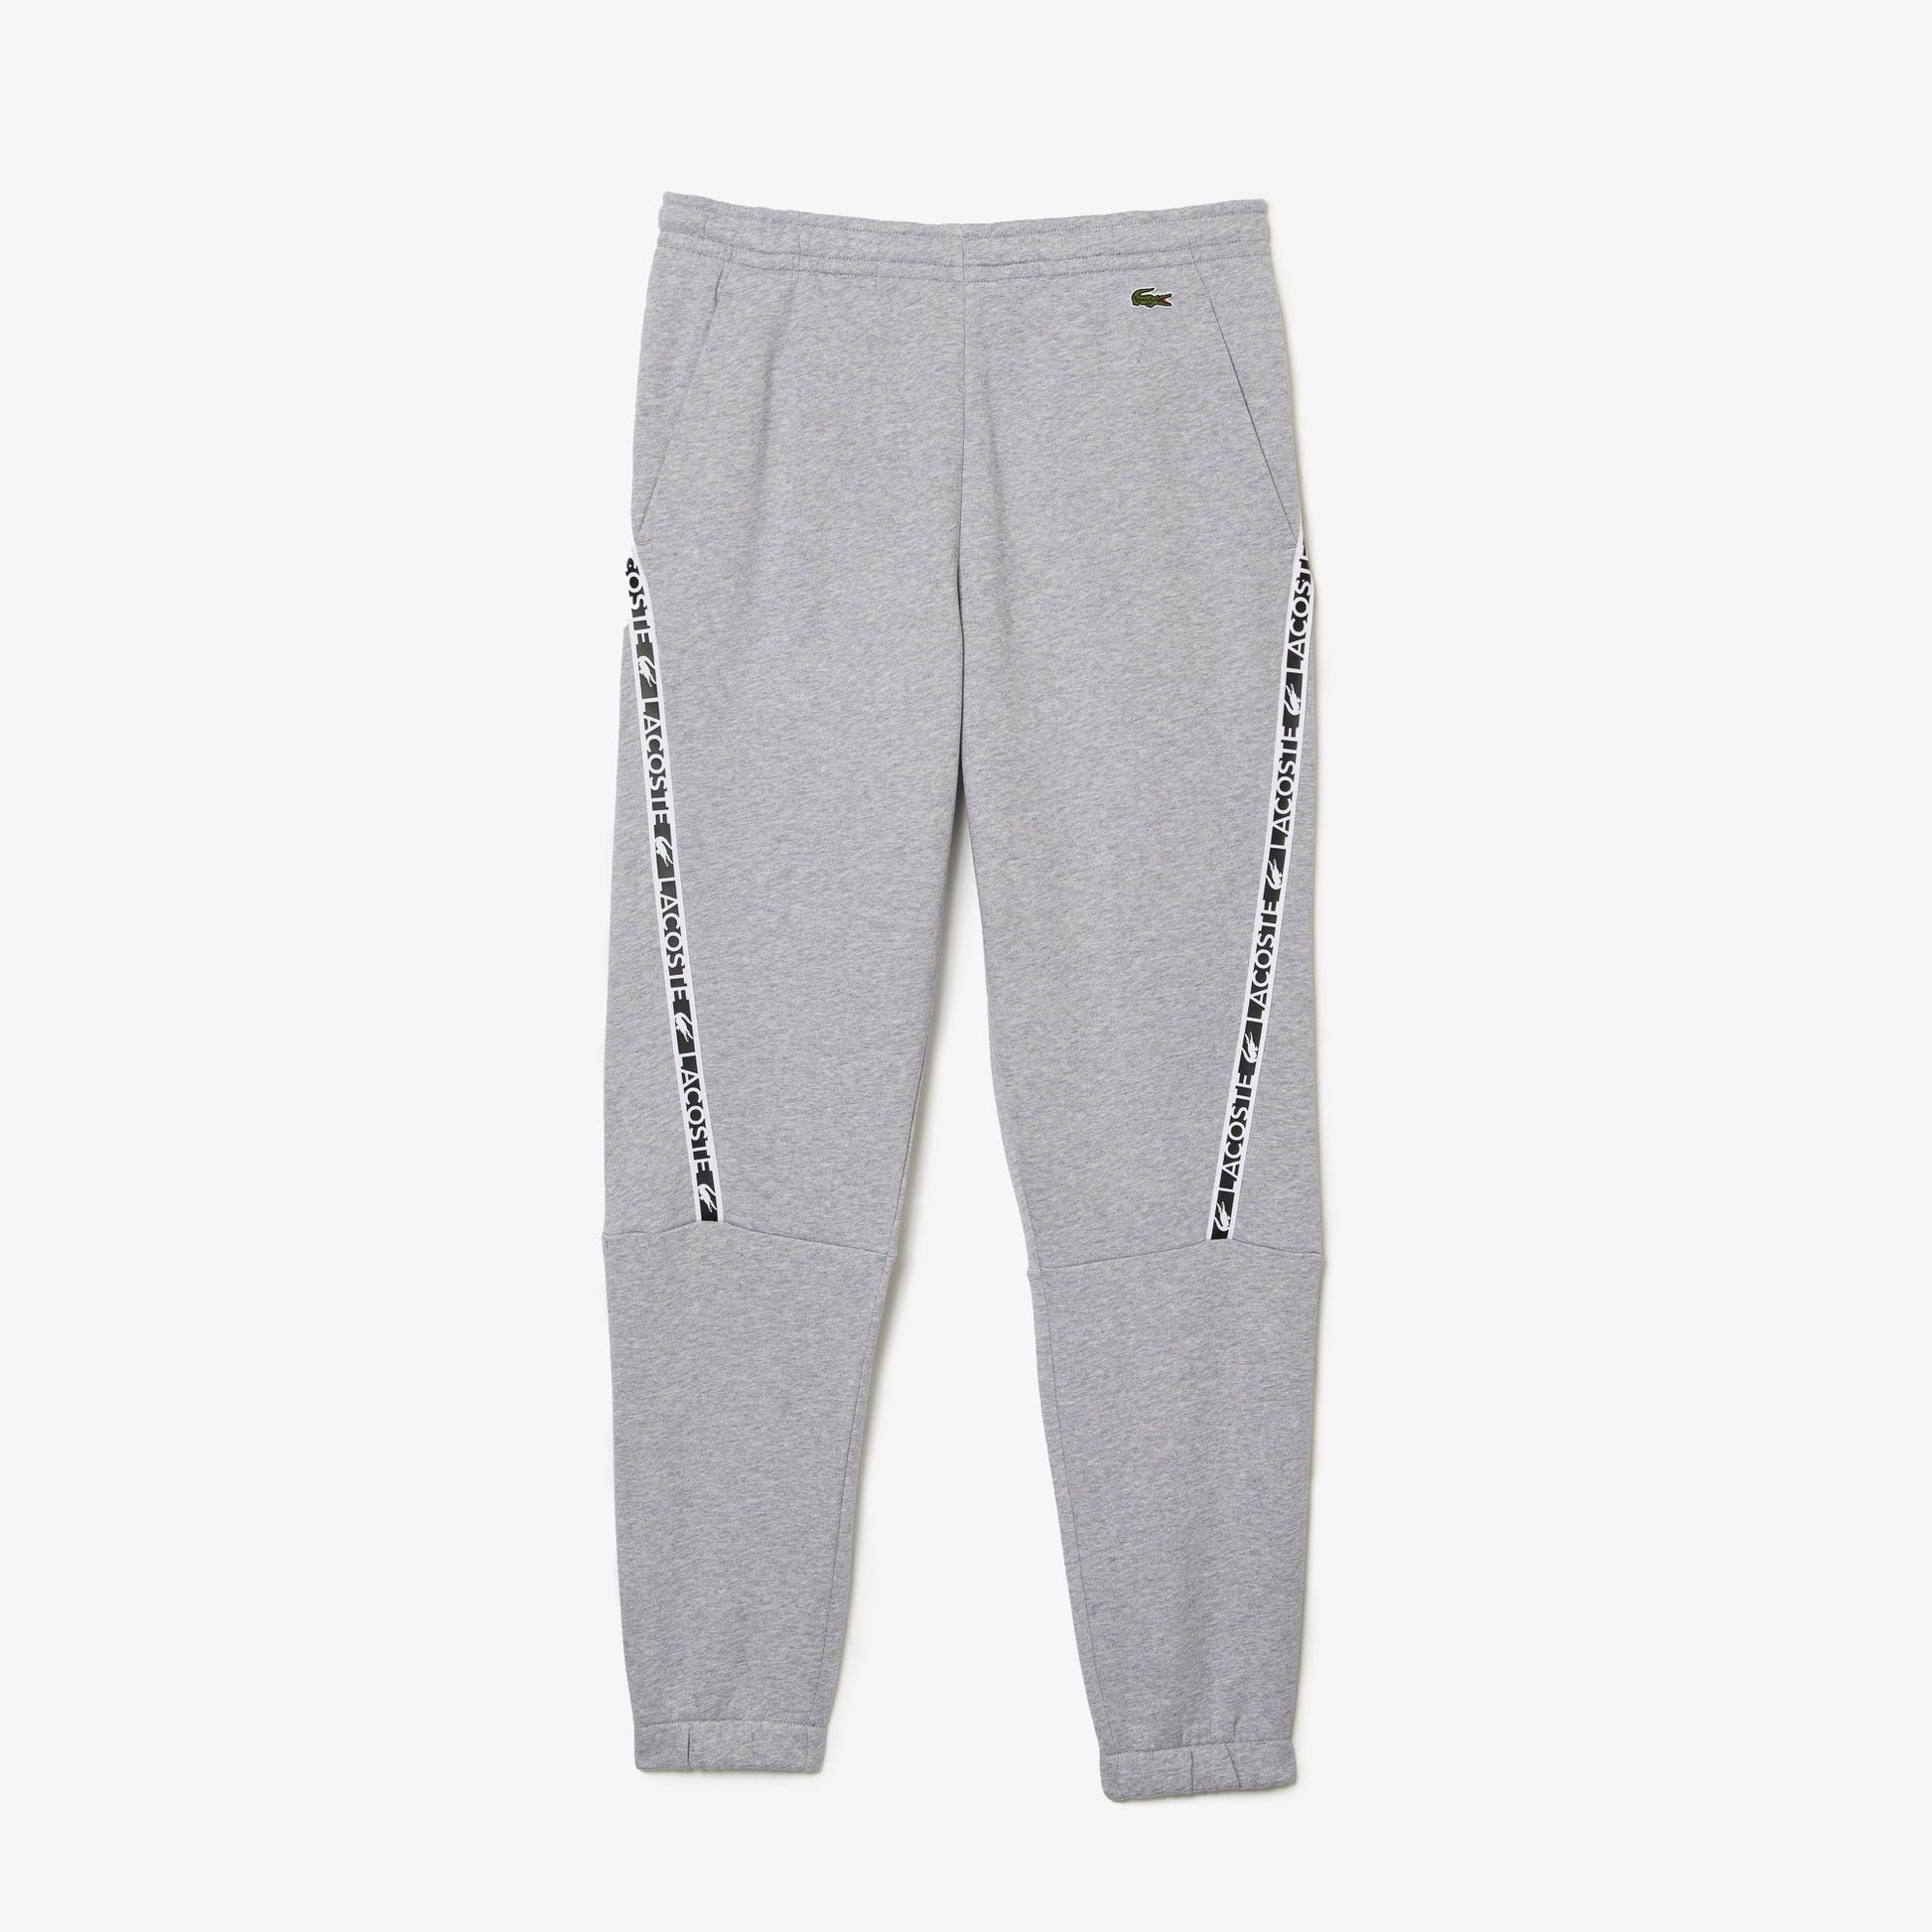 Shop The Latest Collection Of Lacoste Men'S Lacoste Printed Bands Trackpants - Xh9888 In Lebanon